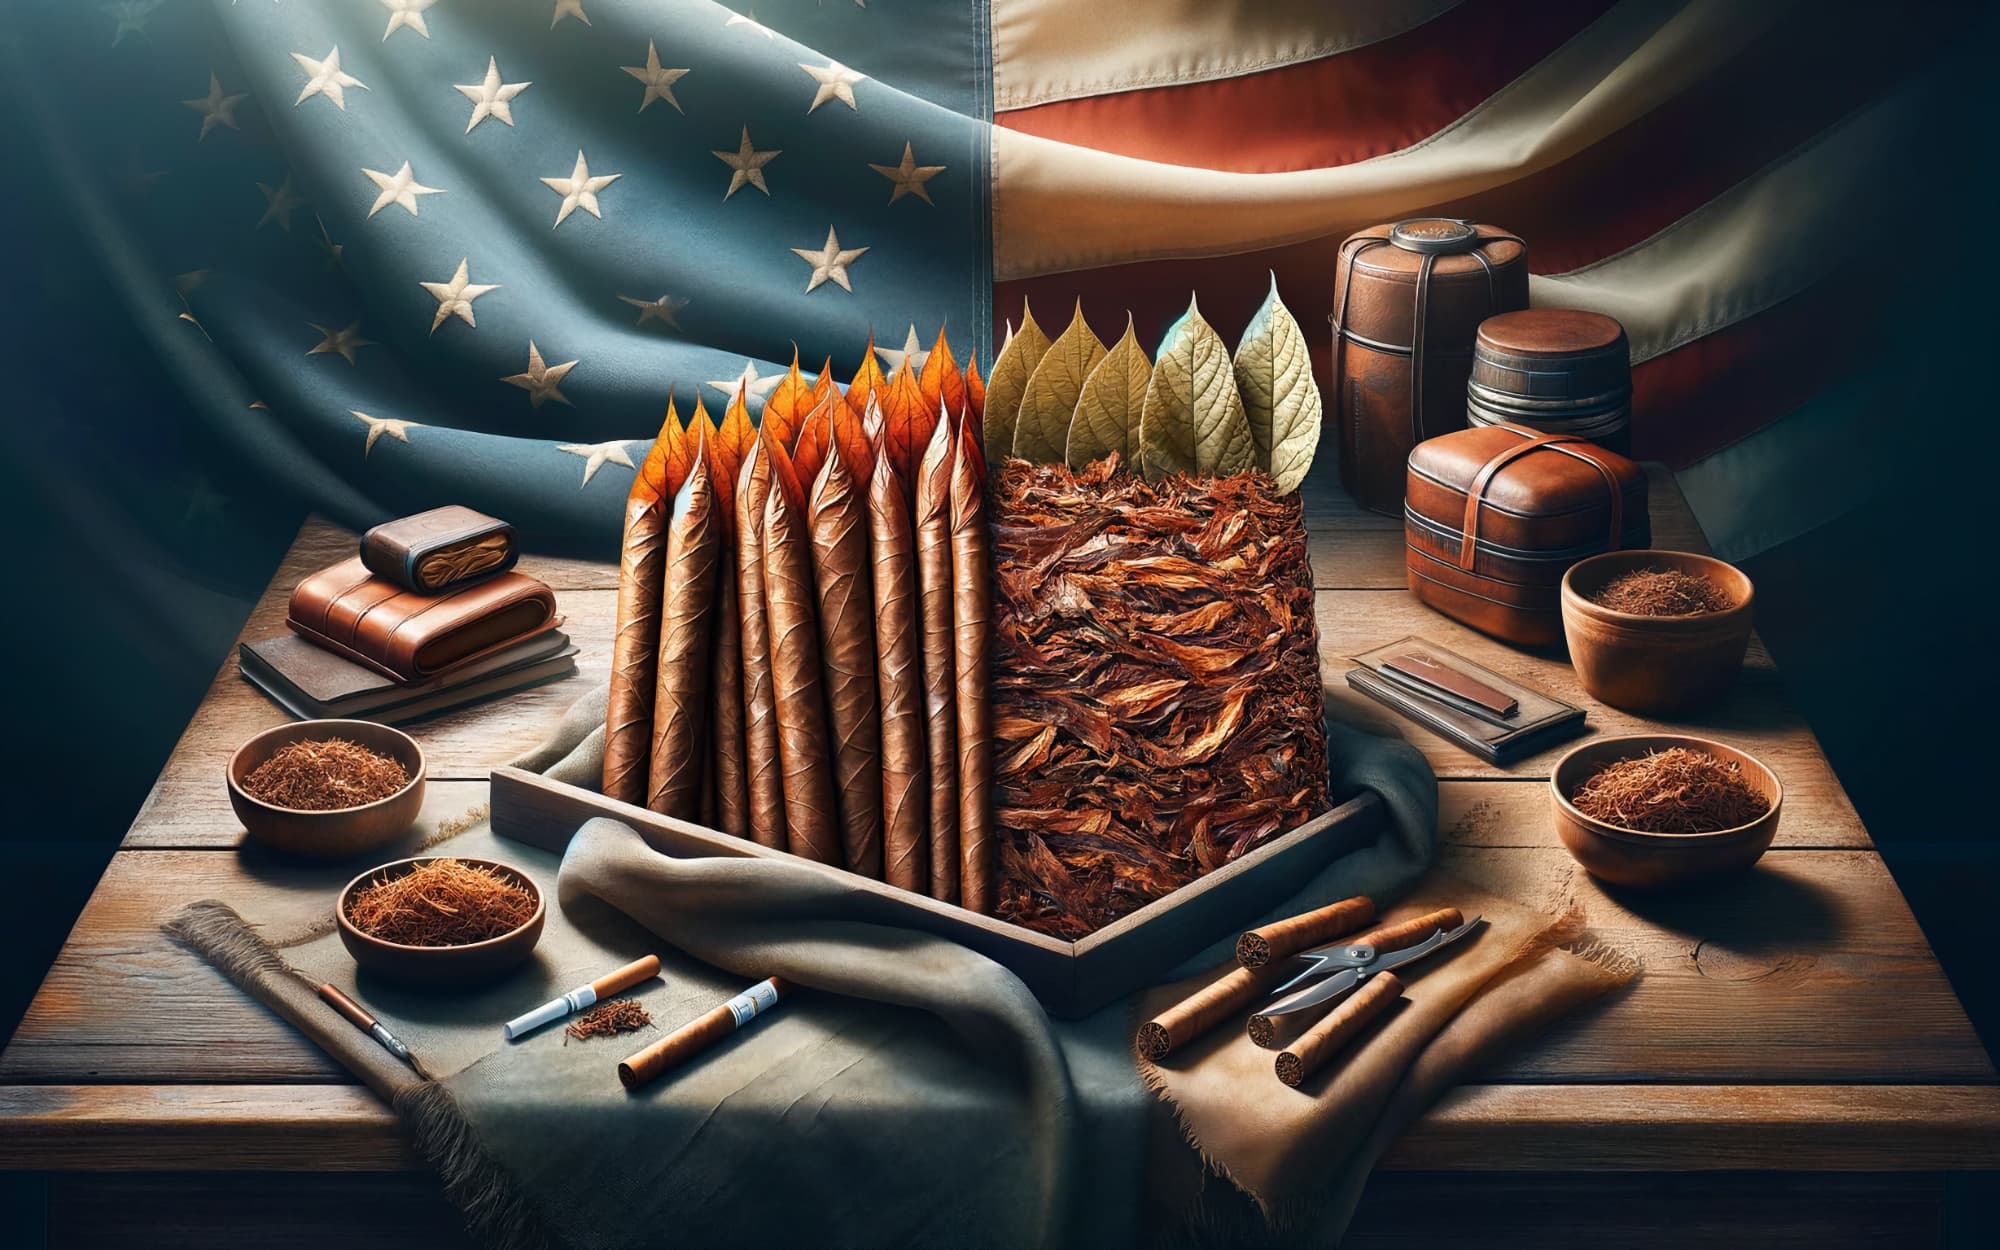 Cigars, tobacco leaves, and cigarettes against the backdrop of an American Flag.